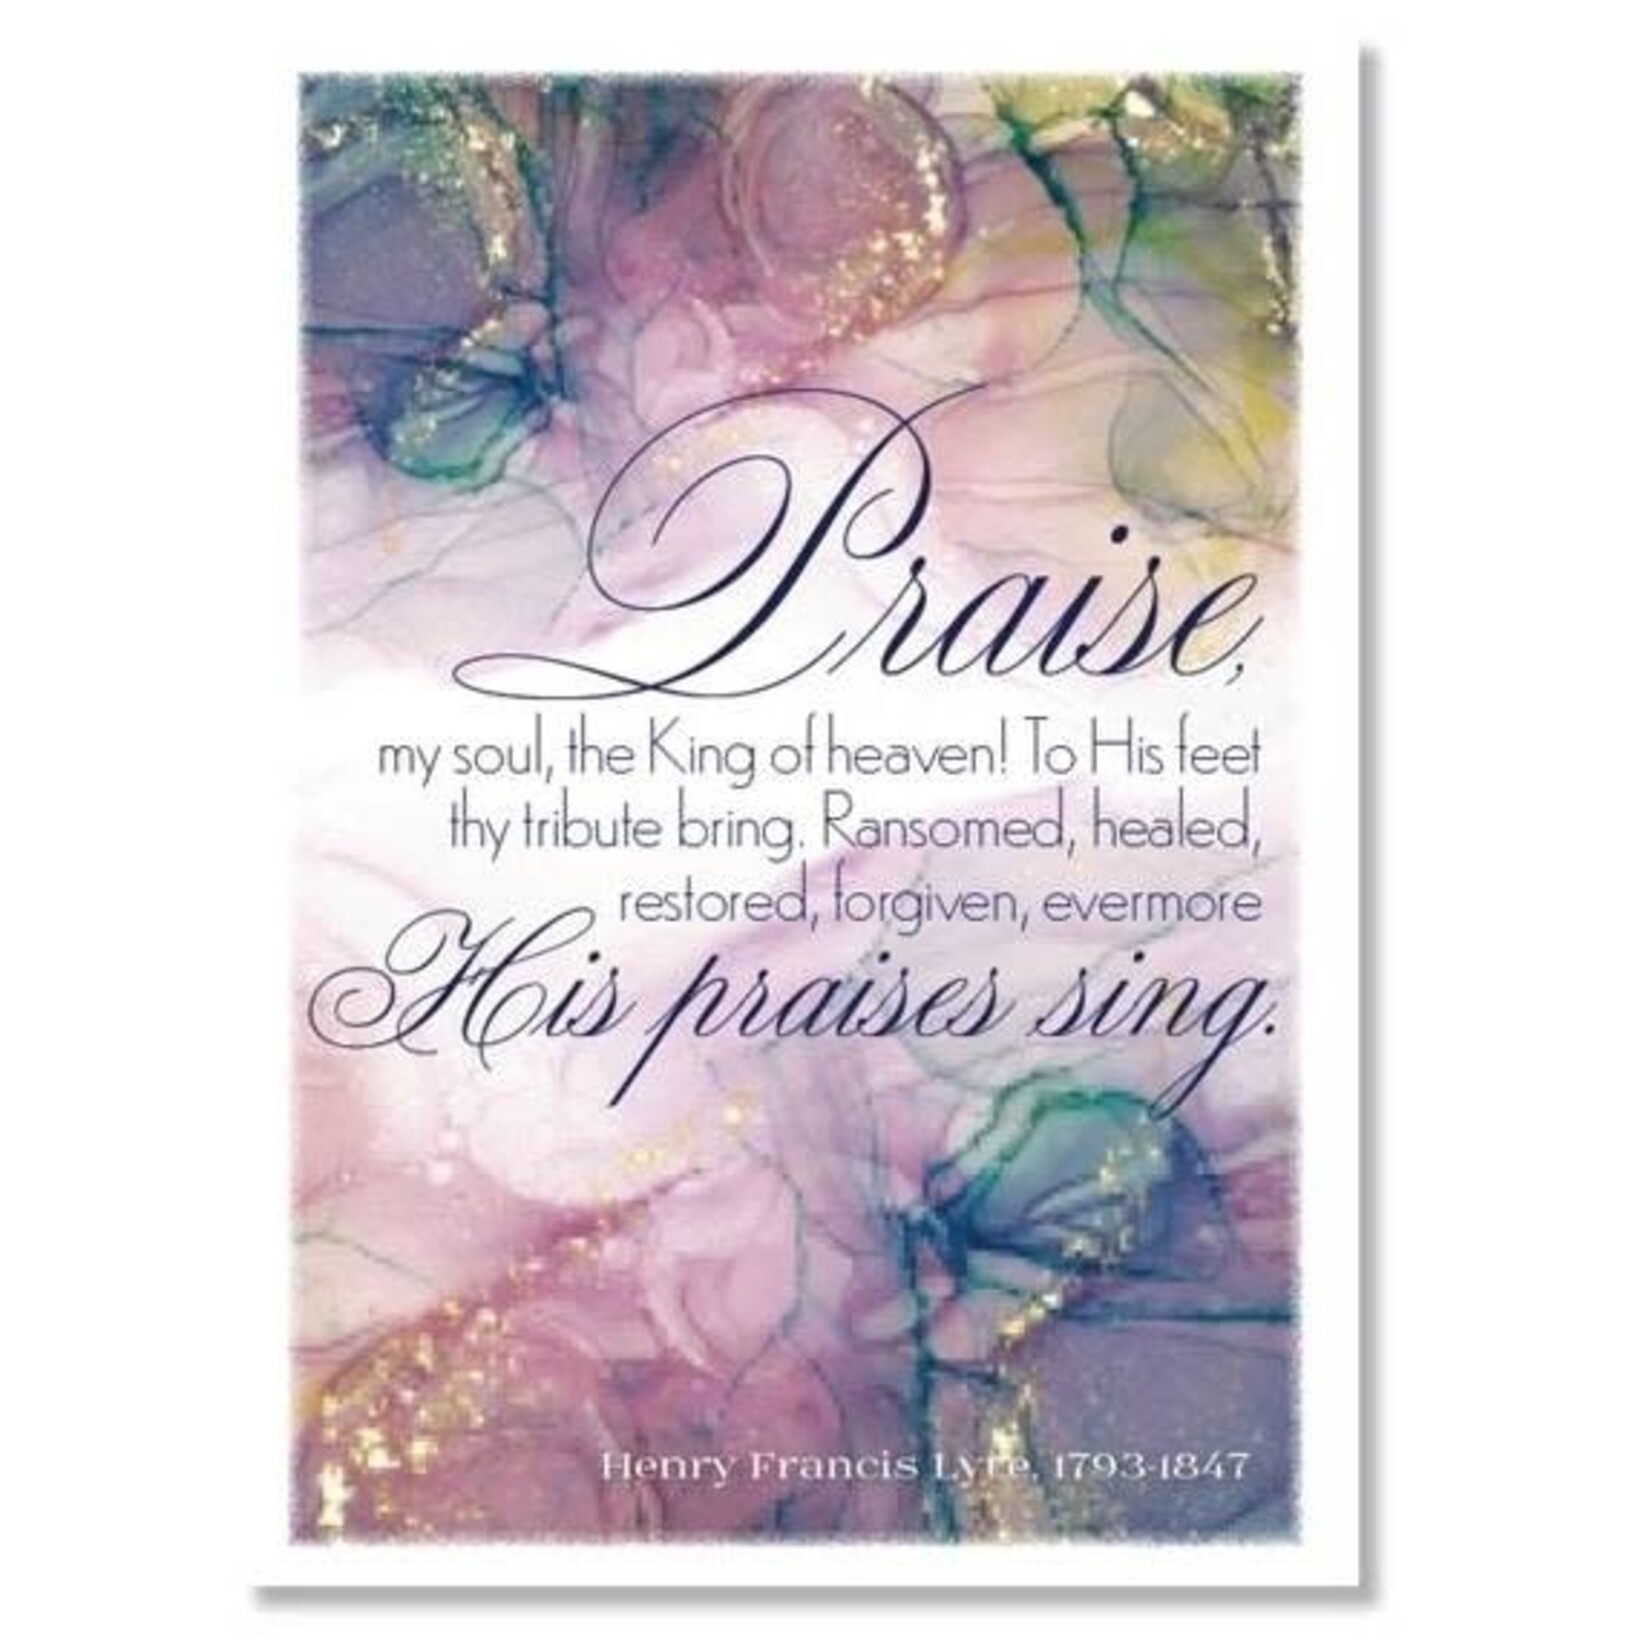 Hymns In My Heart - 5x7" Greeting Card - Wedding Anniversary - Praise, My Soul, the King of Heaven